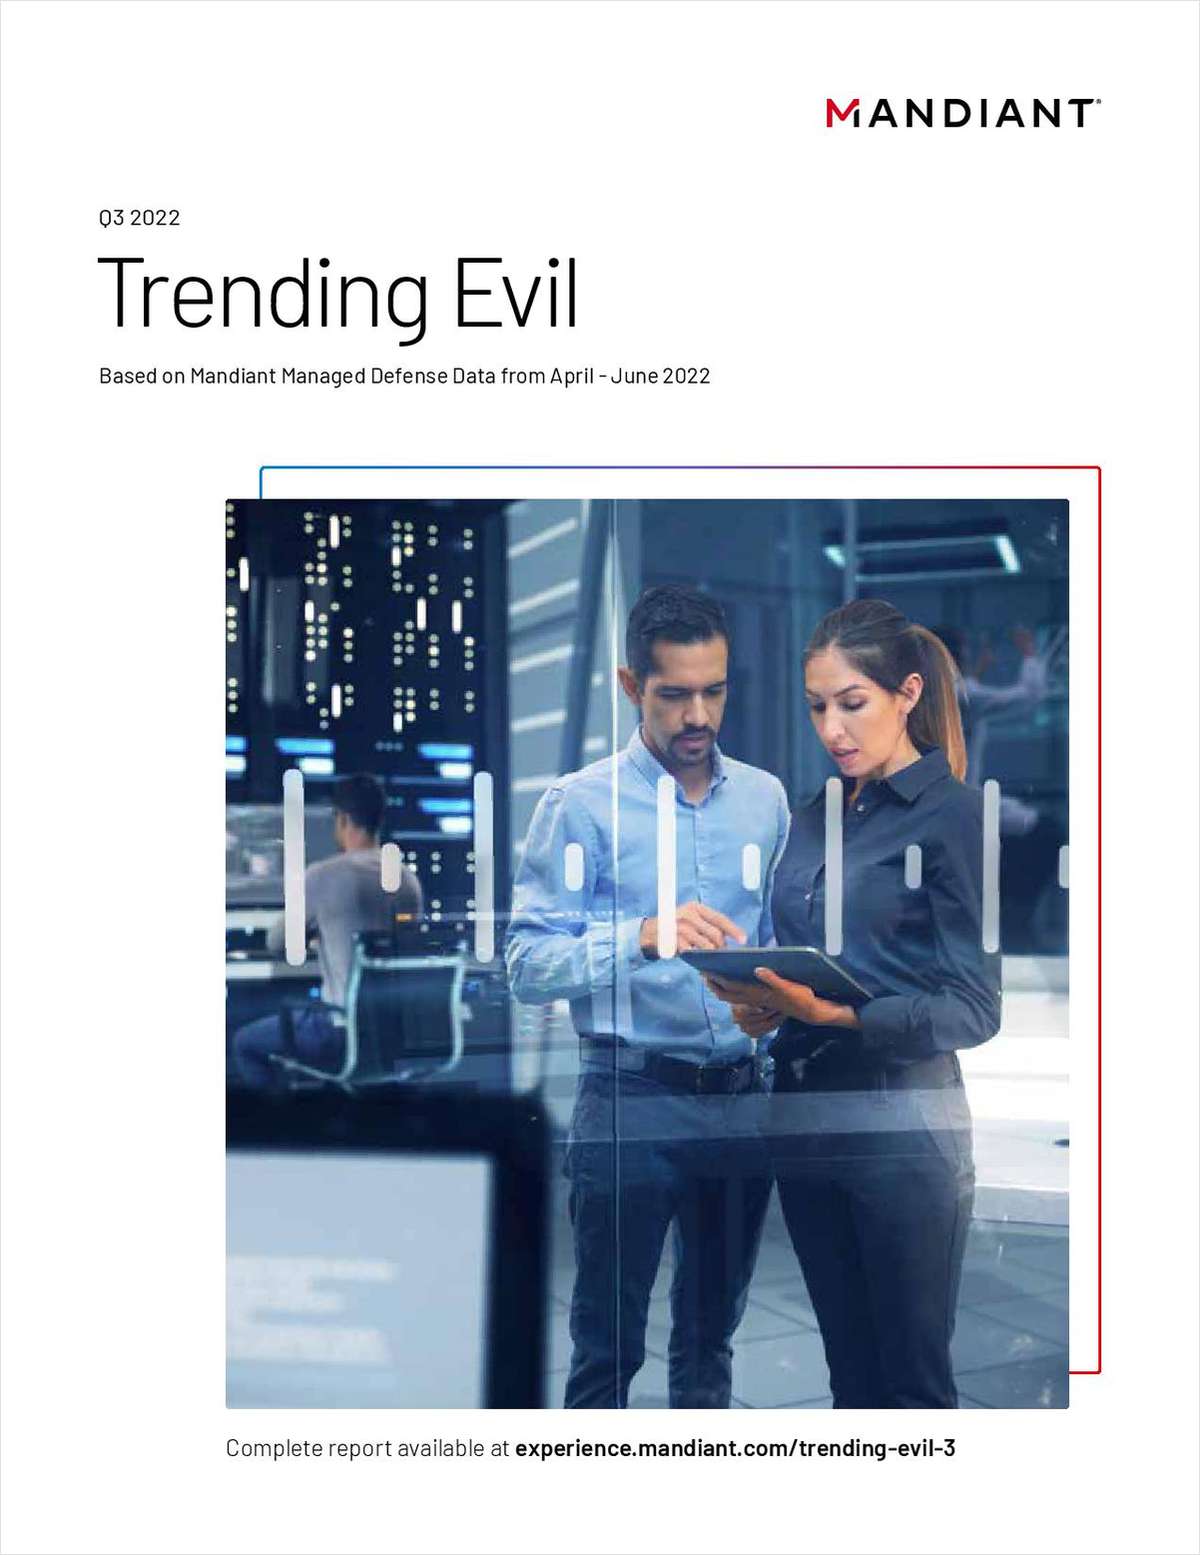 Trending Evil 3 - Findings from Mandiant Managed Defense